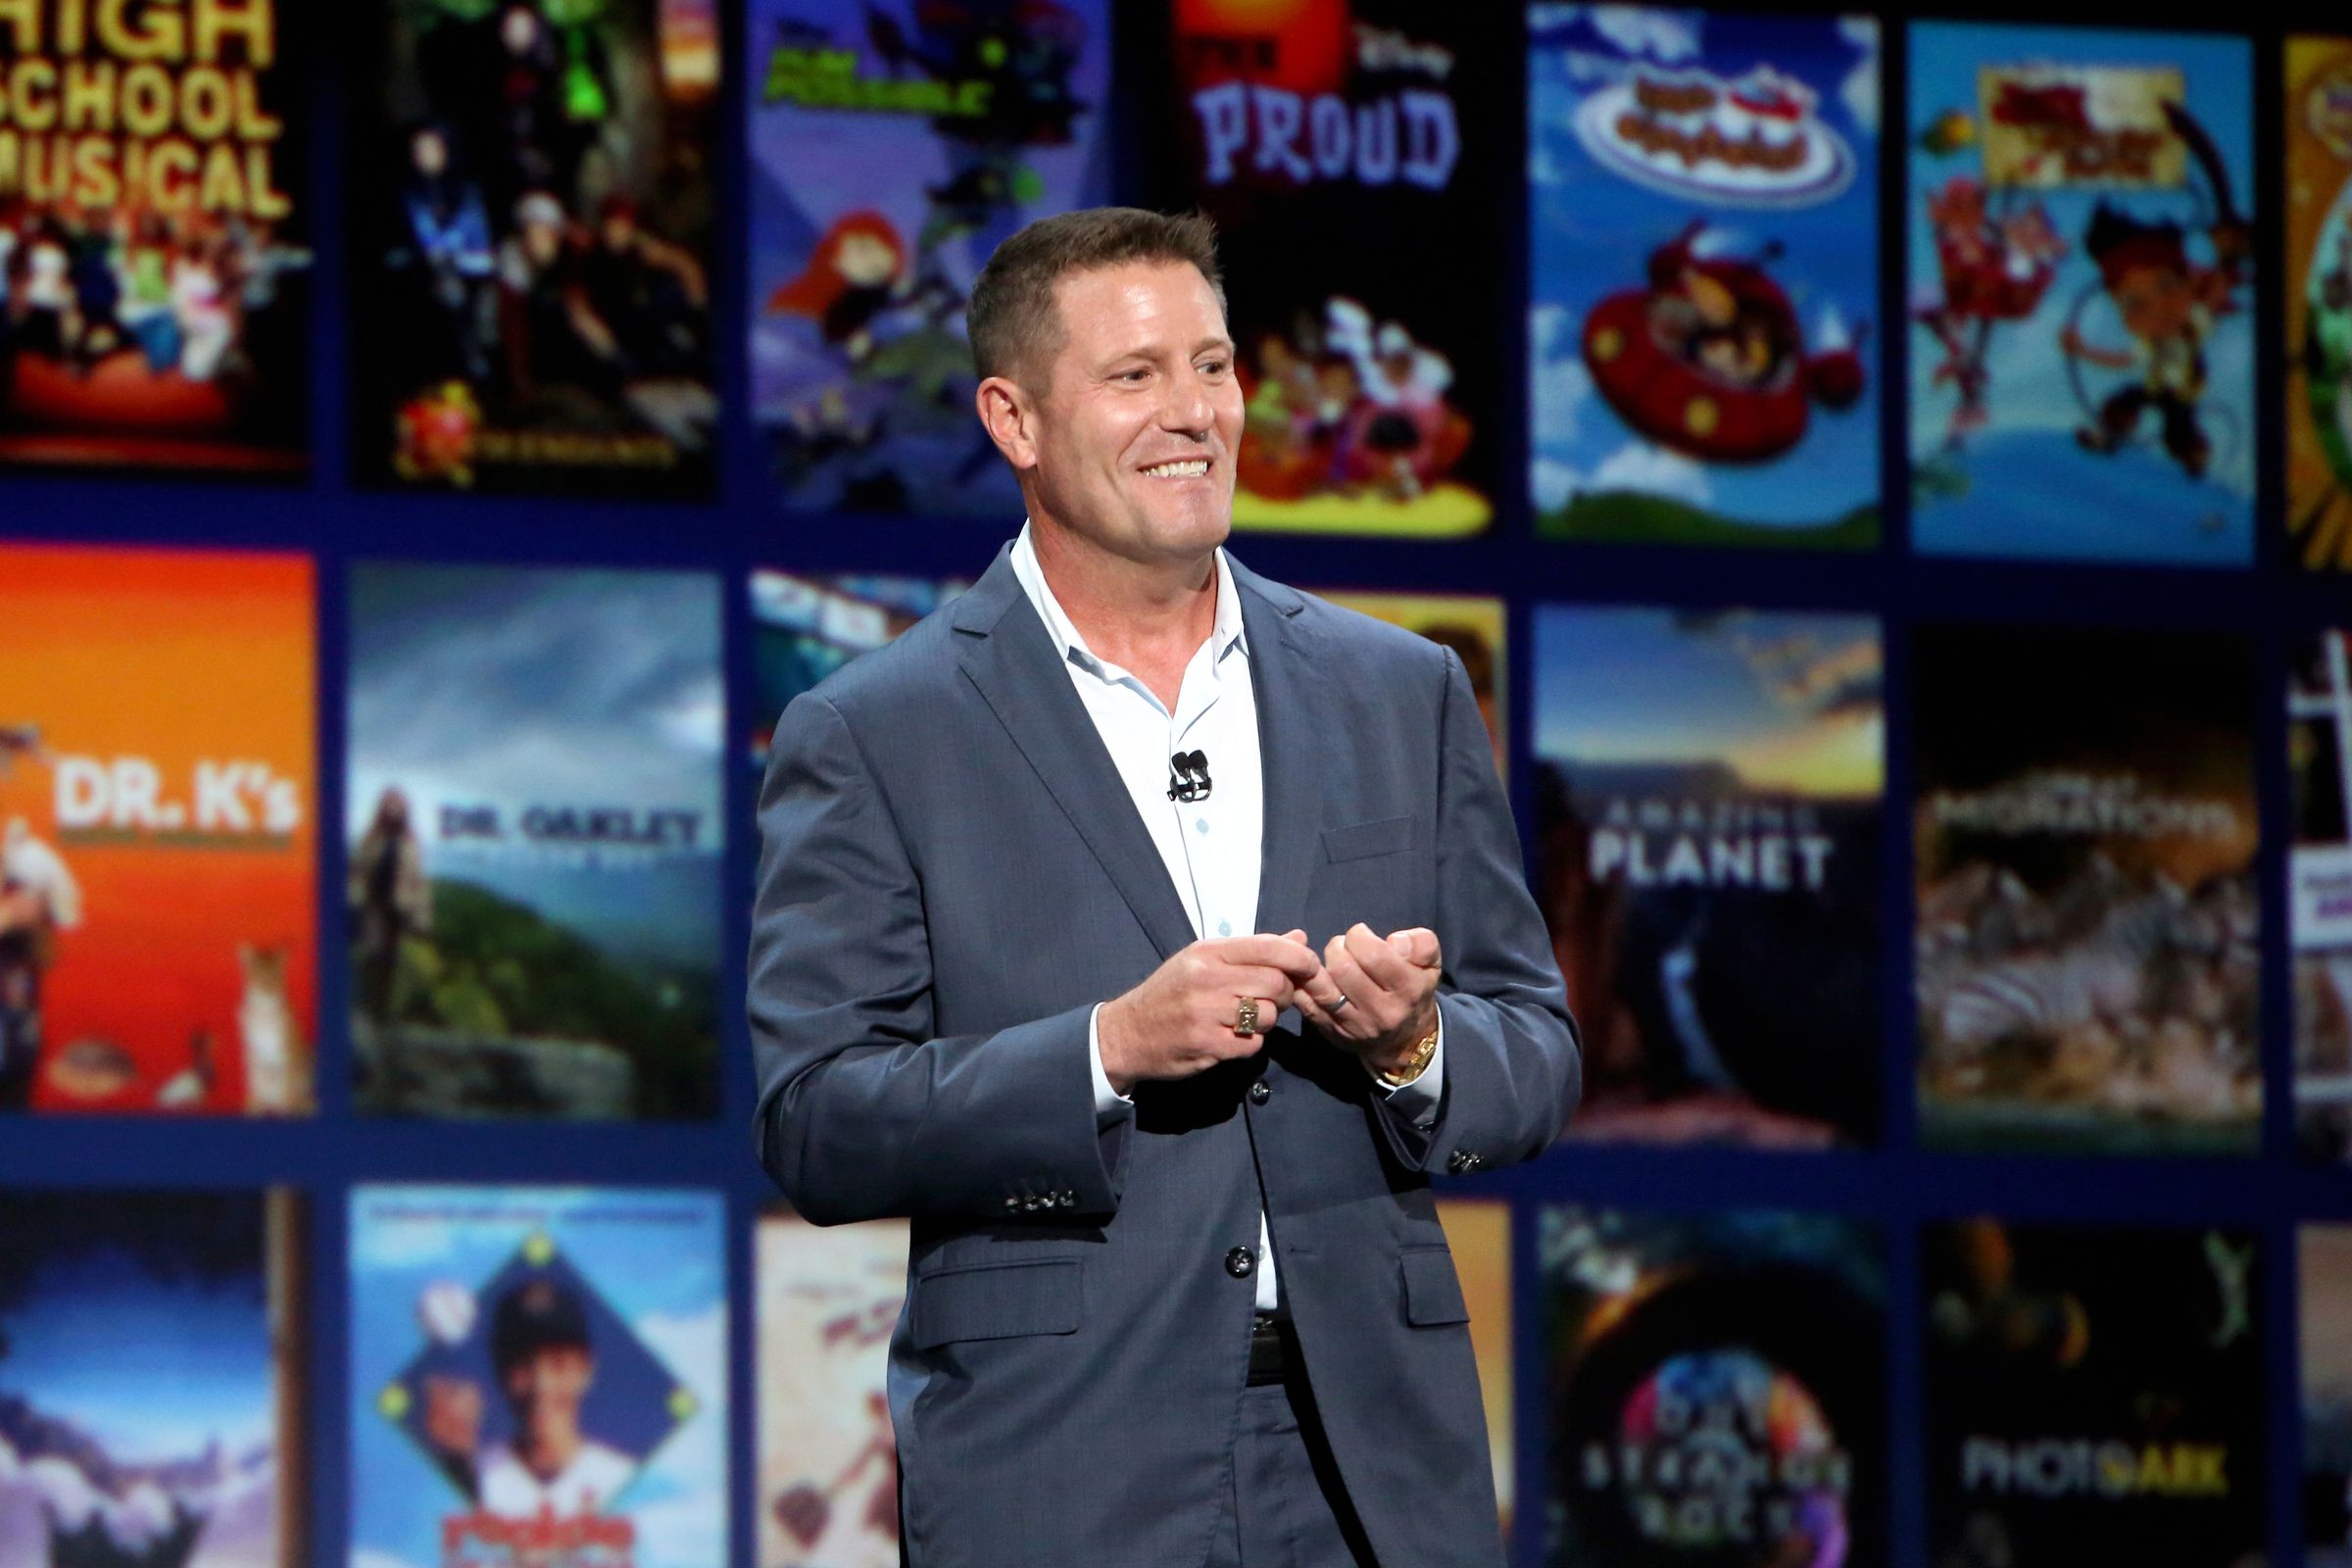 Disney+ Showcase Presentation At D23 Expo Friday, August 23